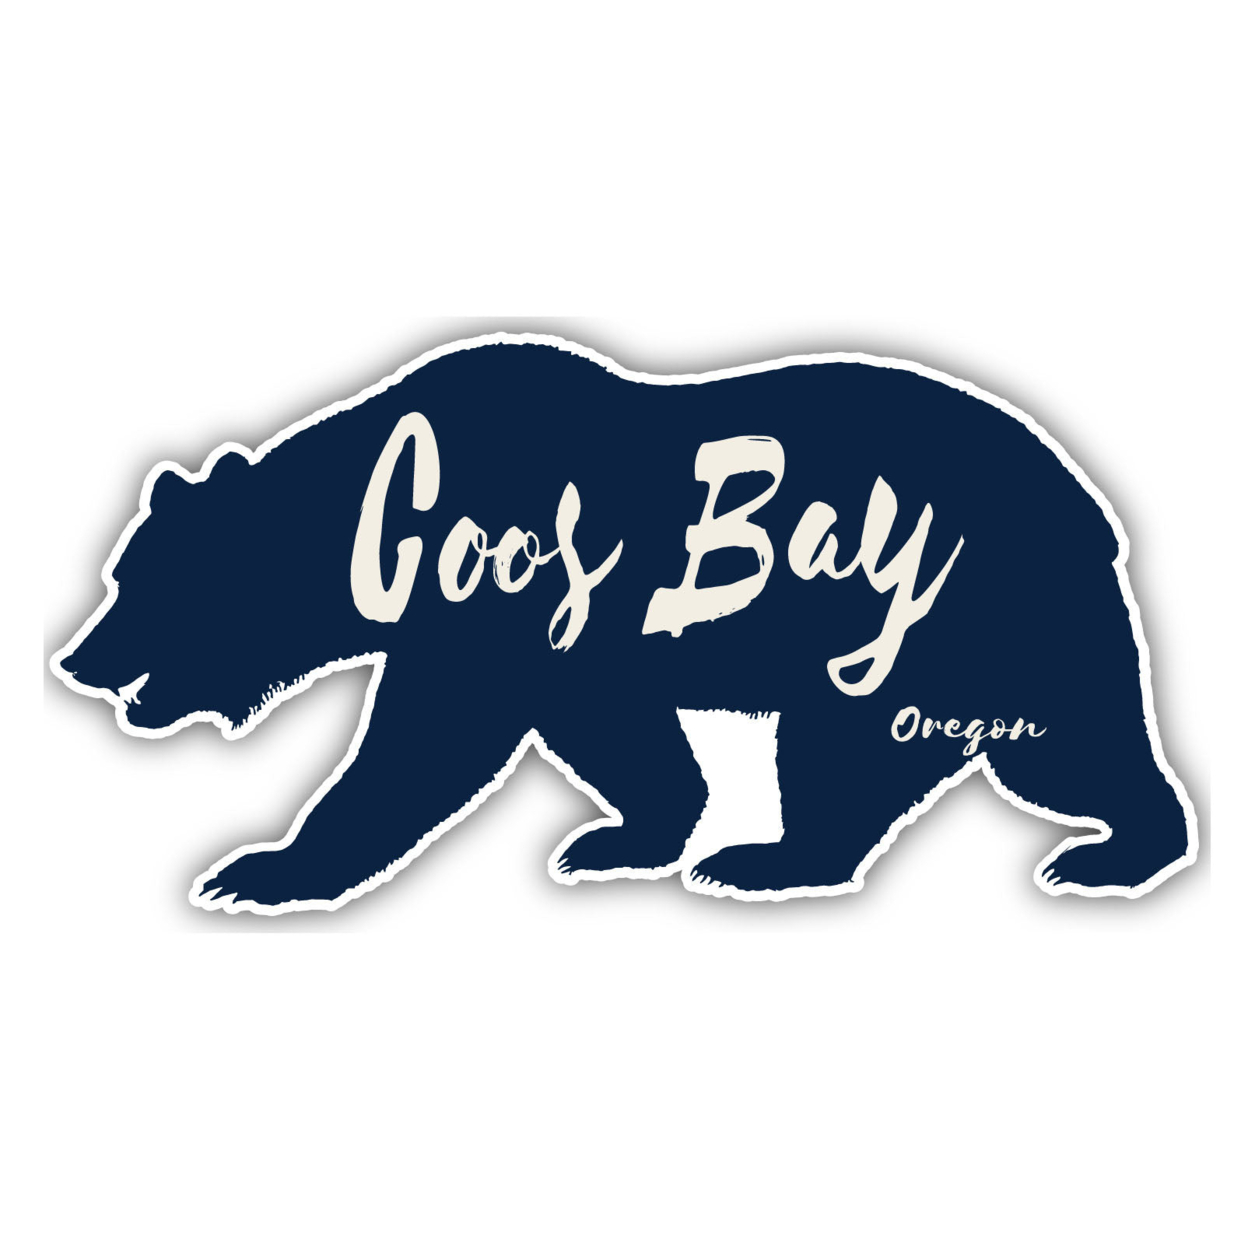 Coos Bay Oregon Souvenir Decorative Stickers (Choose Theme And Size) - 4-Pack, 2-Inch, Adventures Awaits